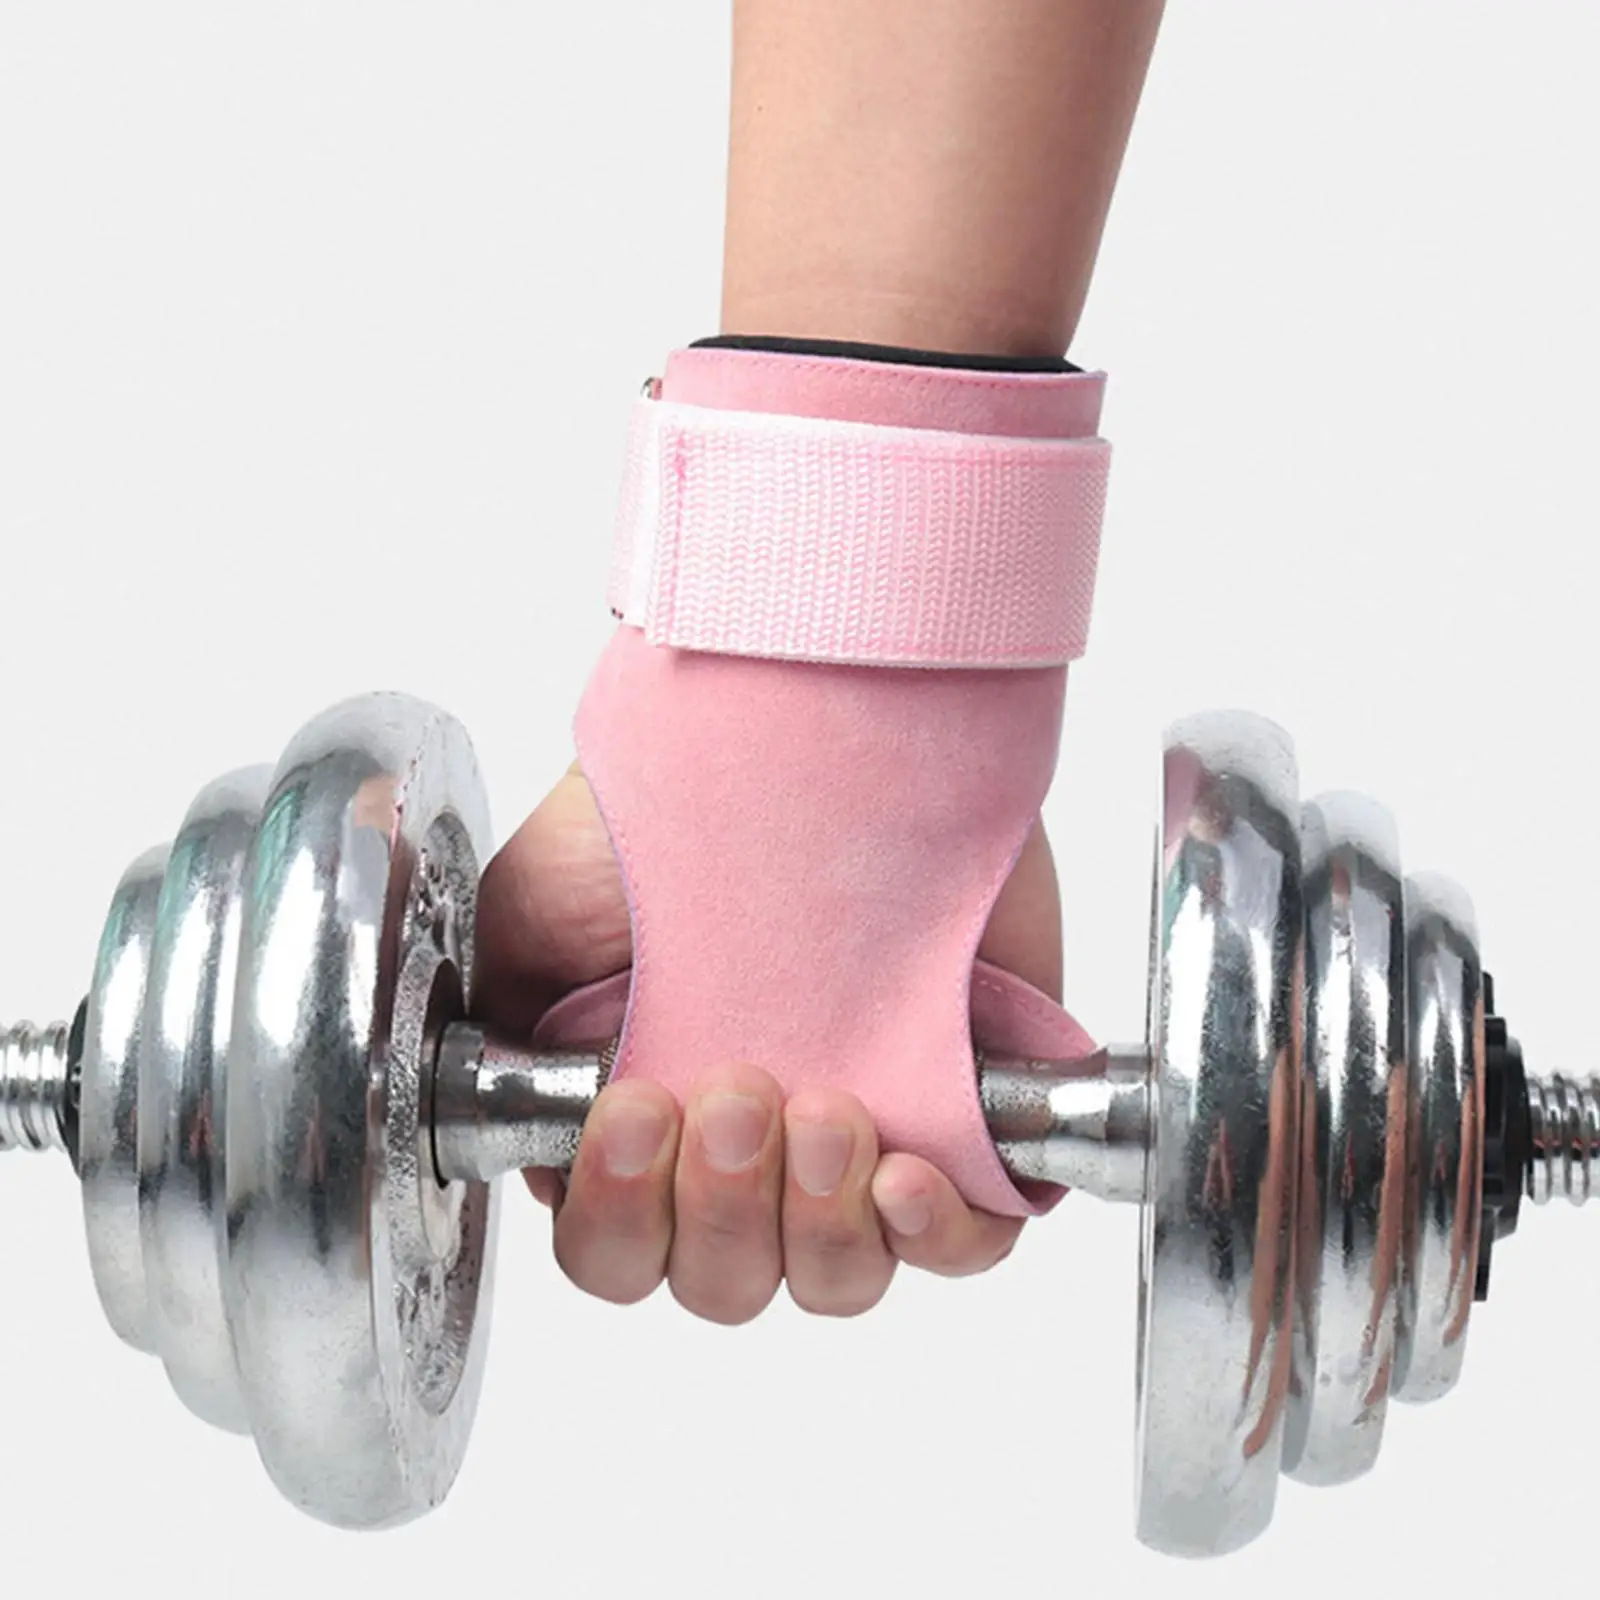 2x Weight Lifting Grips with Wrist Straps Wrist Support fitness